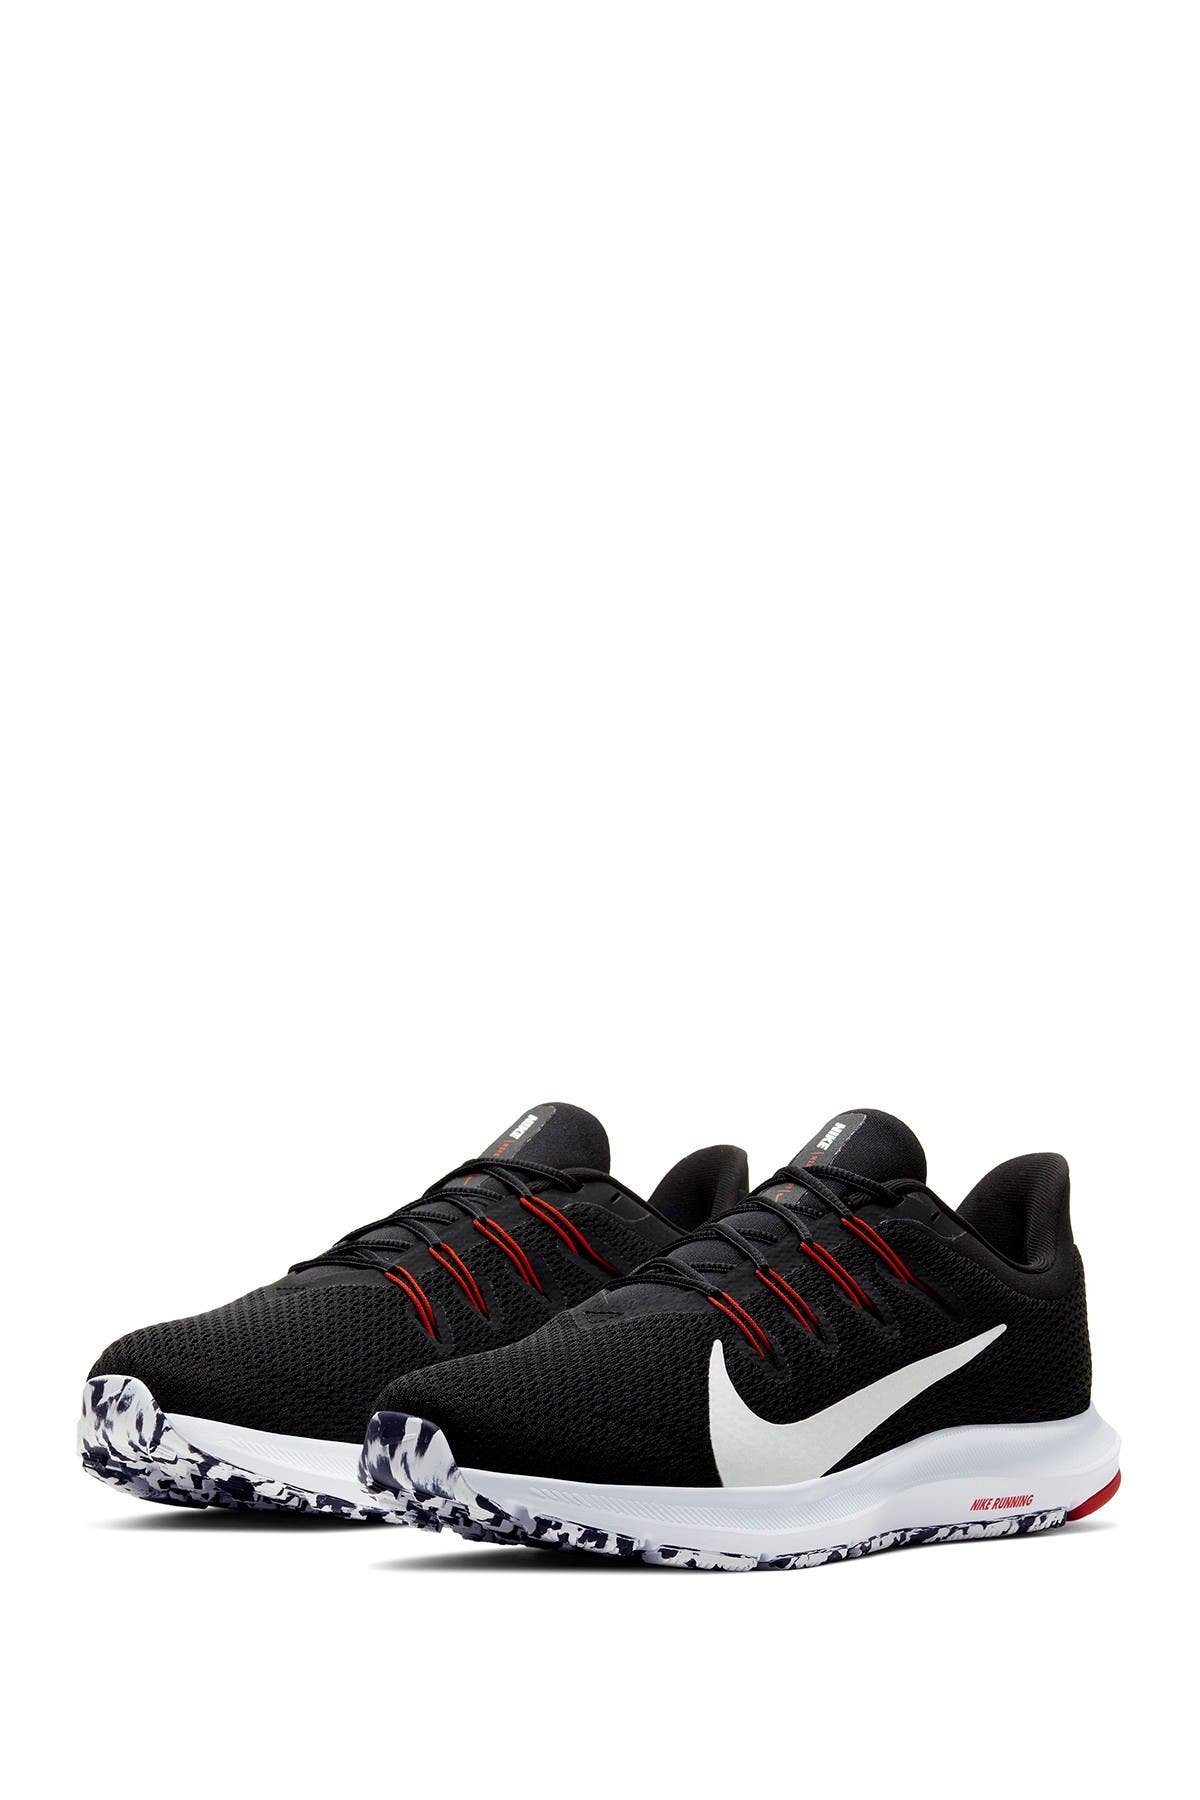 nike quest 2 black and red